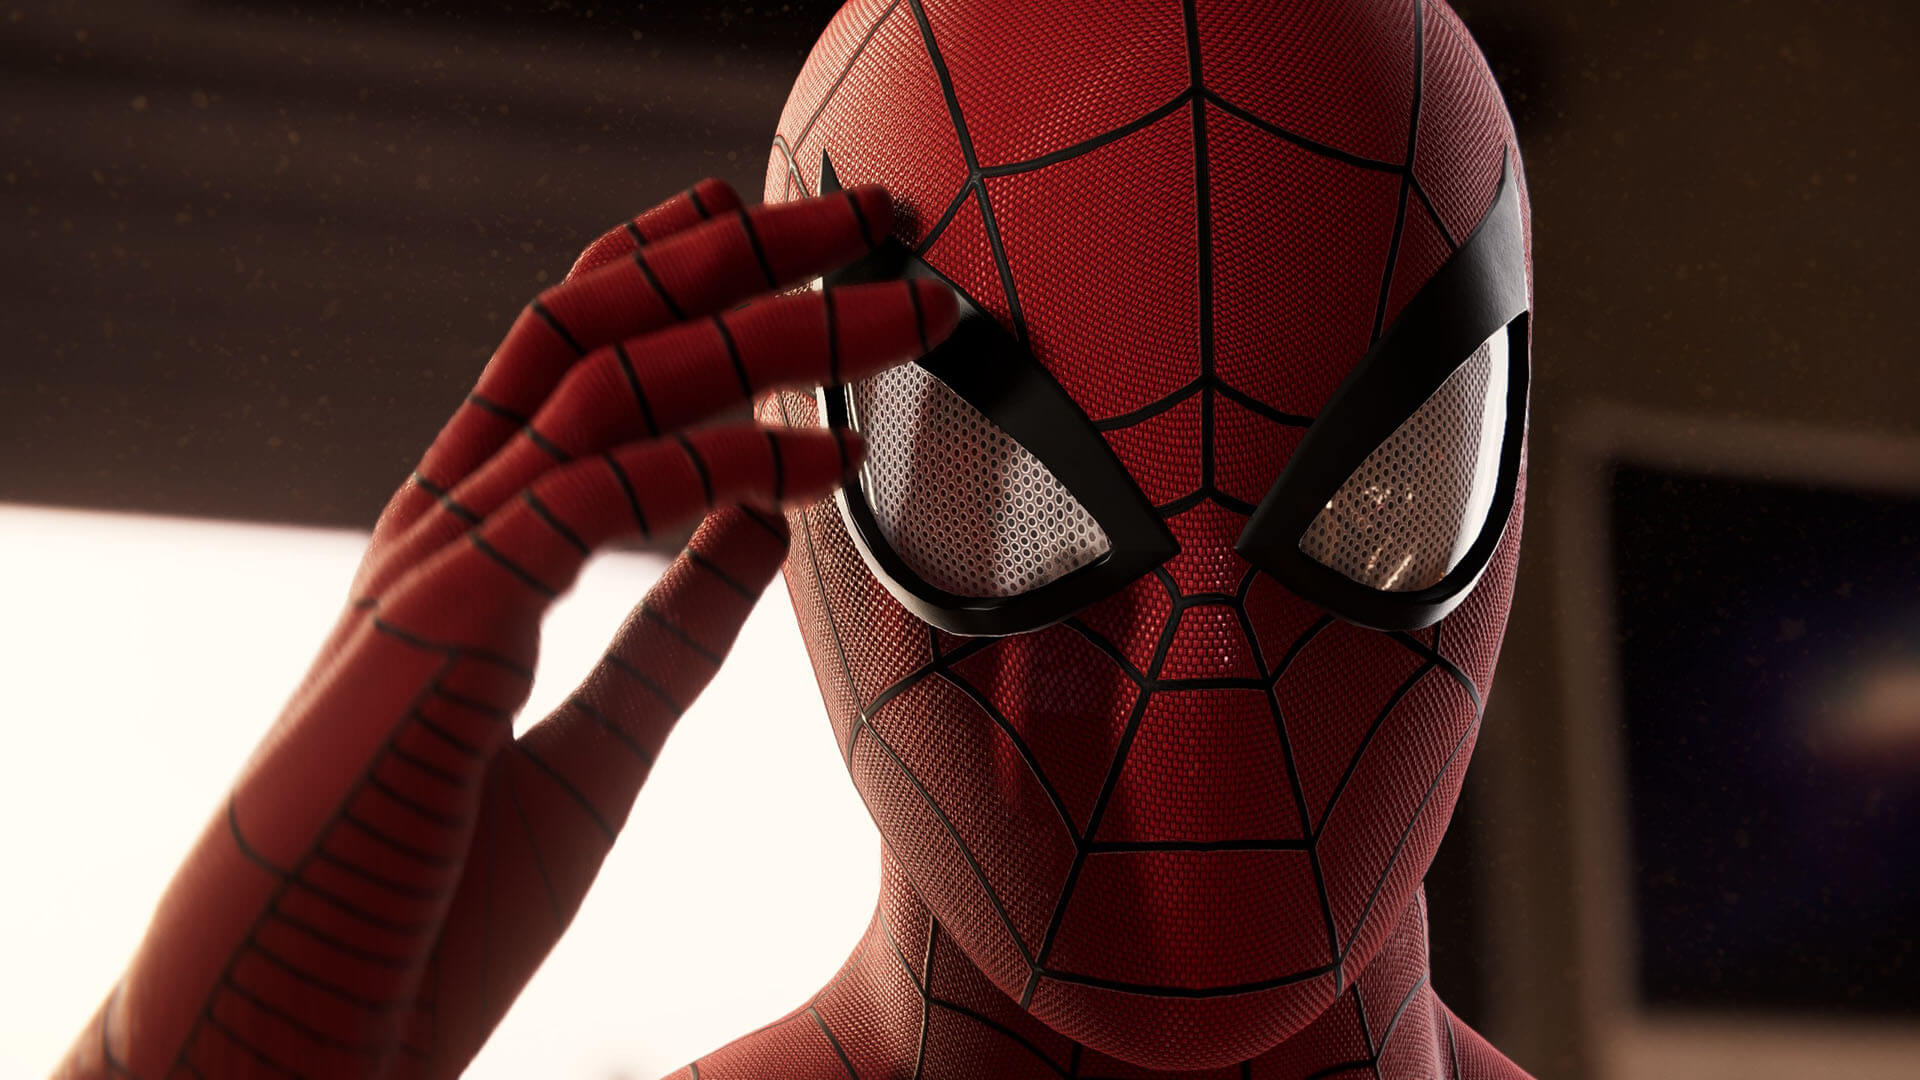 Marvel's Spider-Man Remastered comes to PC in August 2022